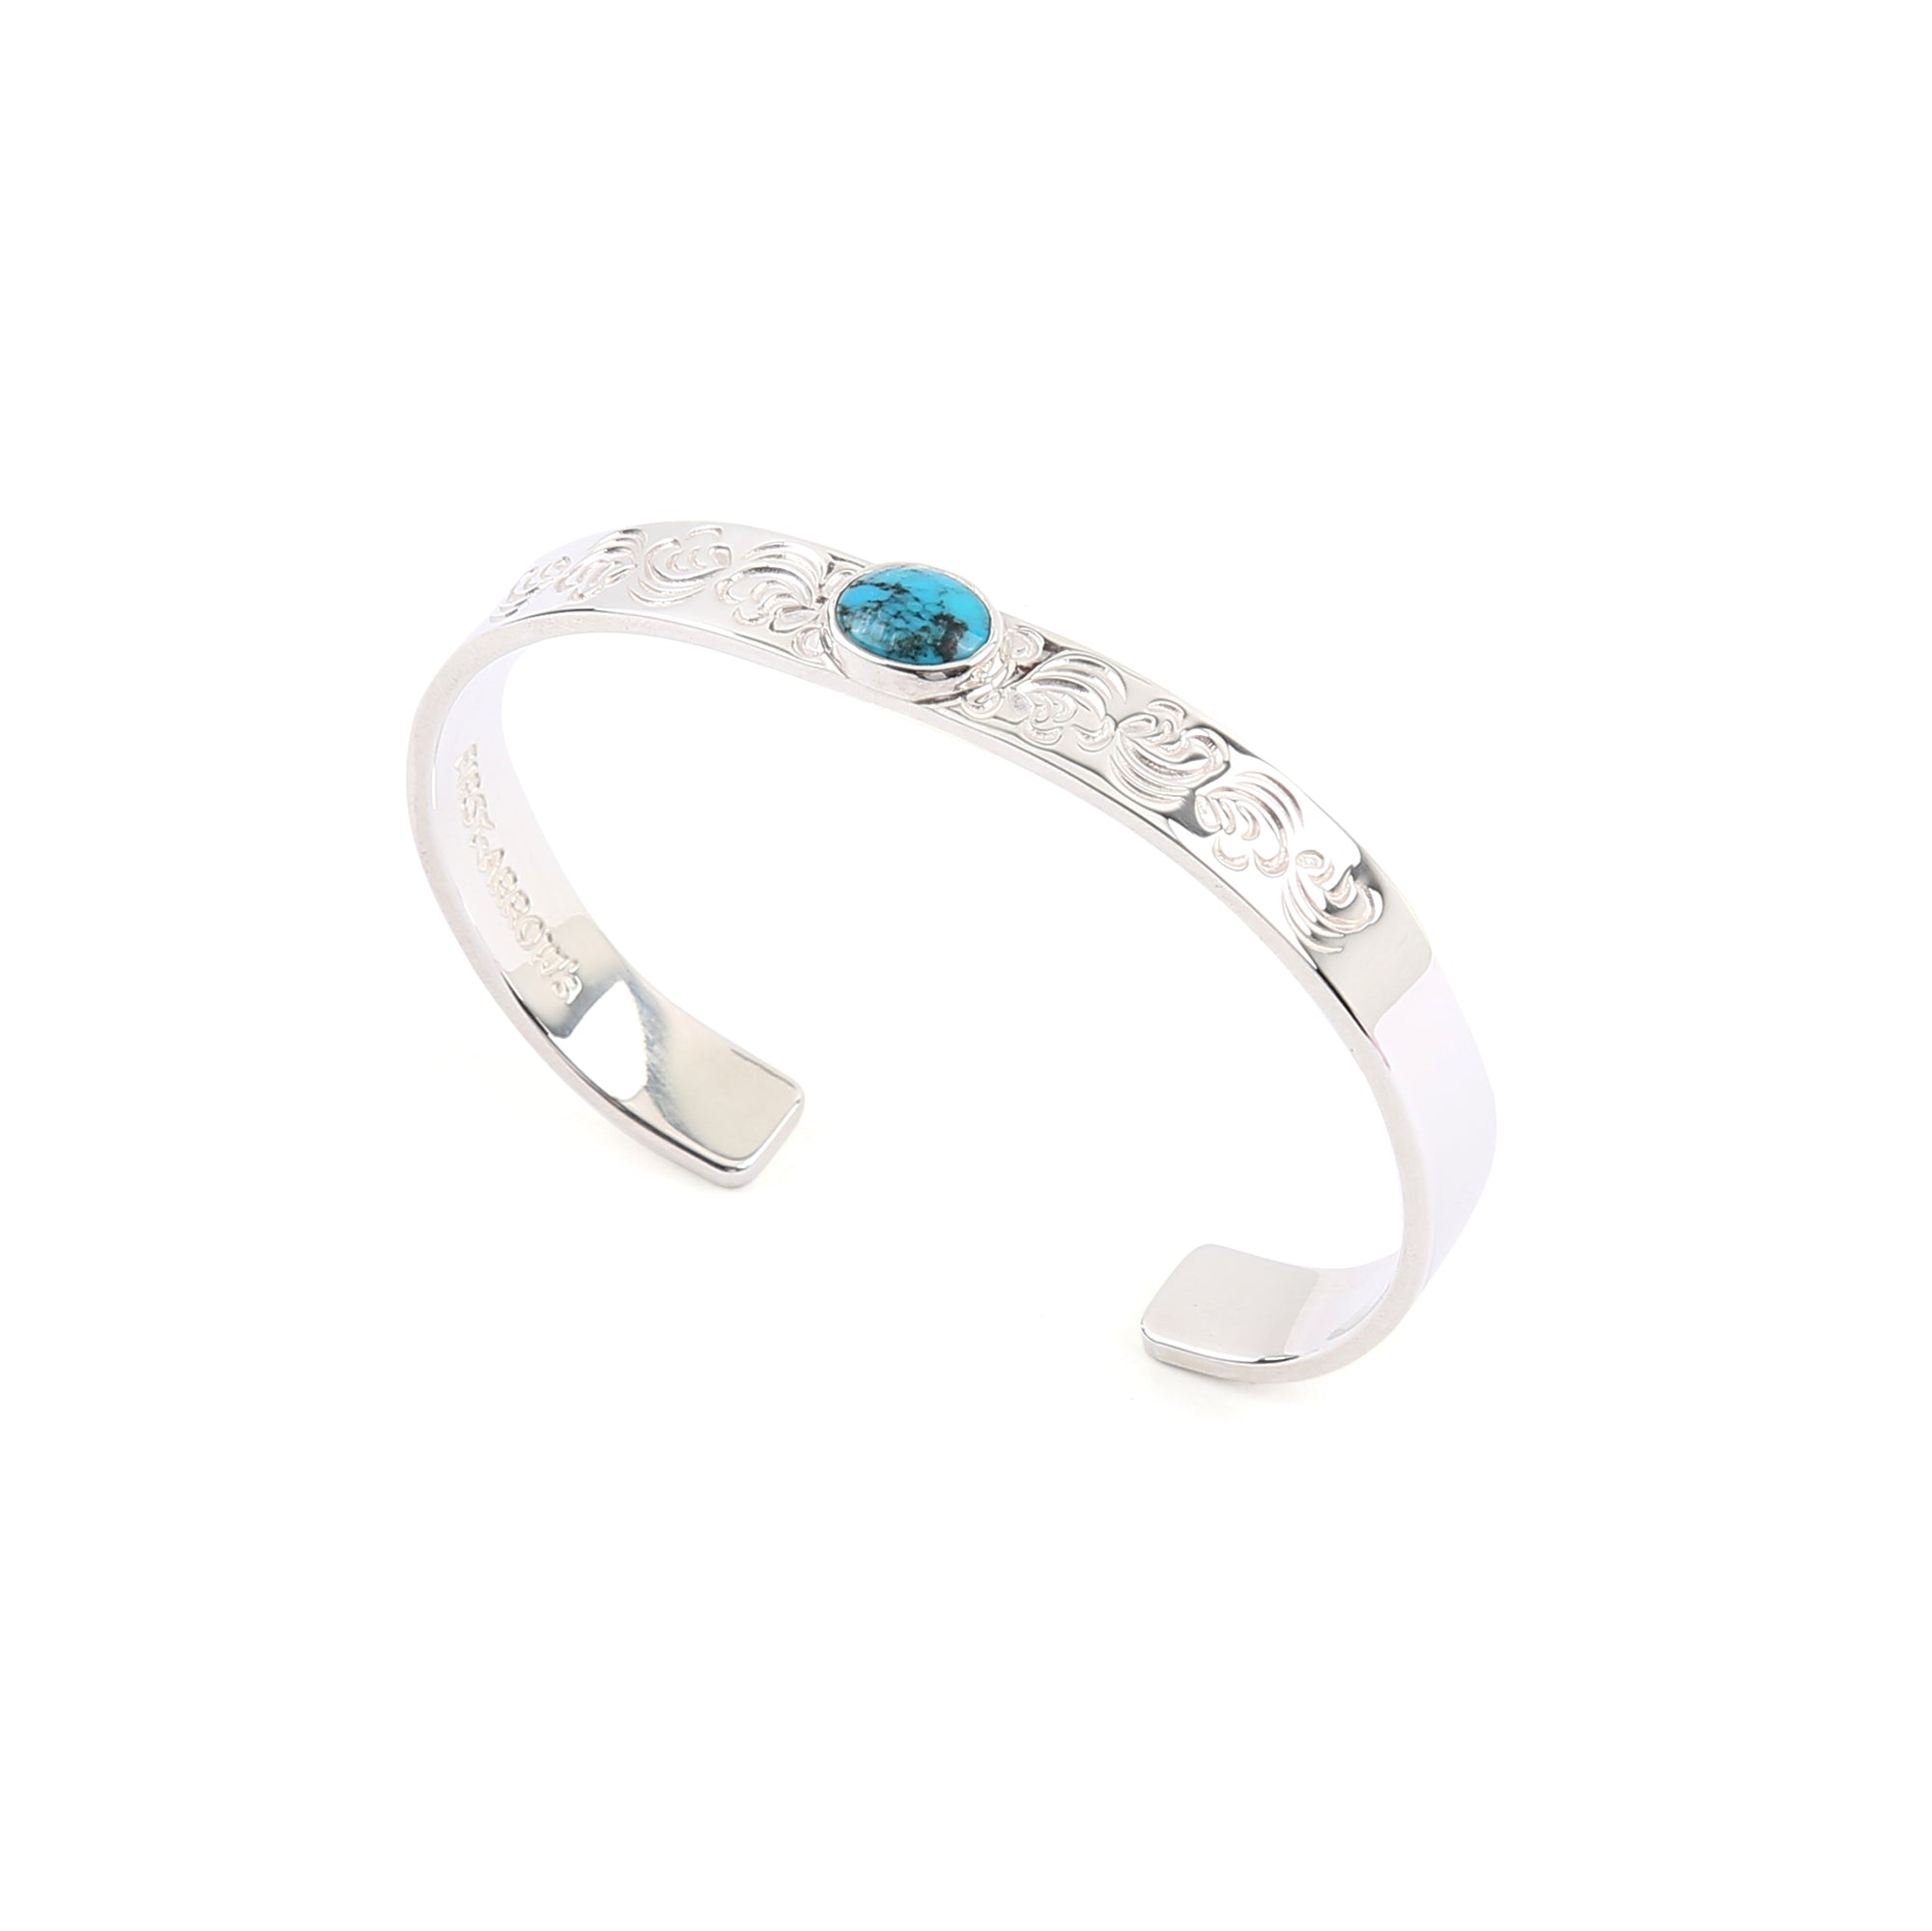 First Arrow's 8mm Arabesque Bangle with Turquoise